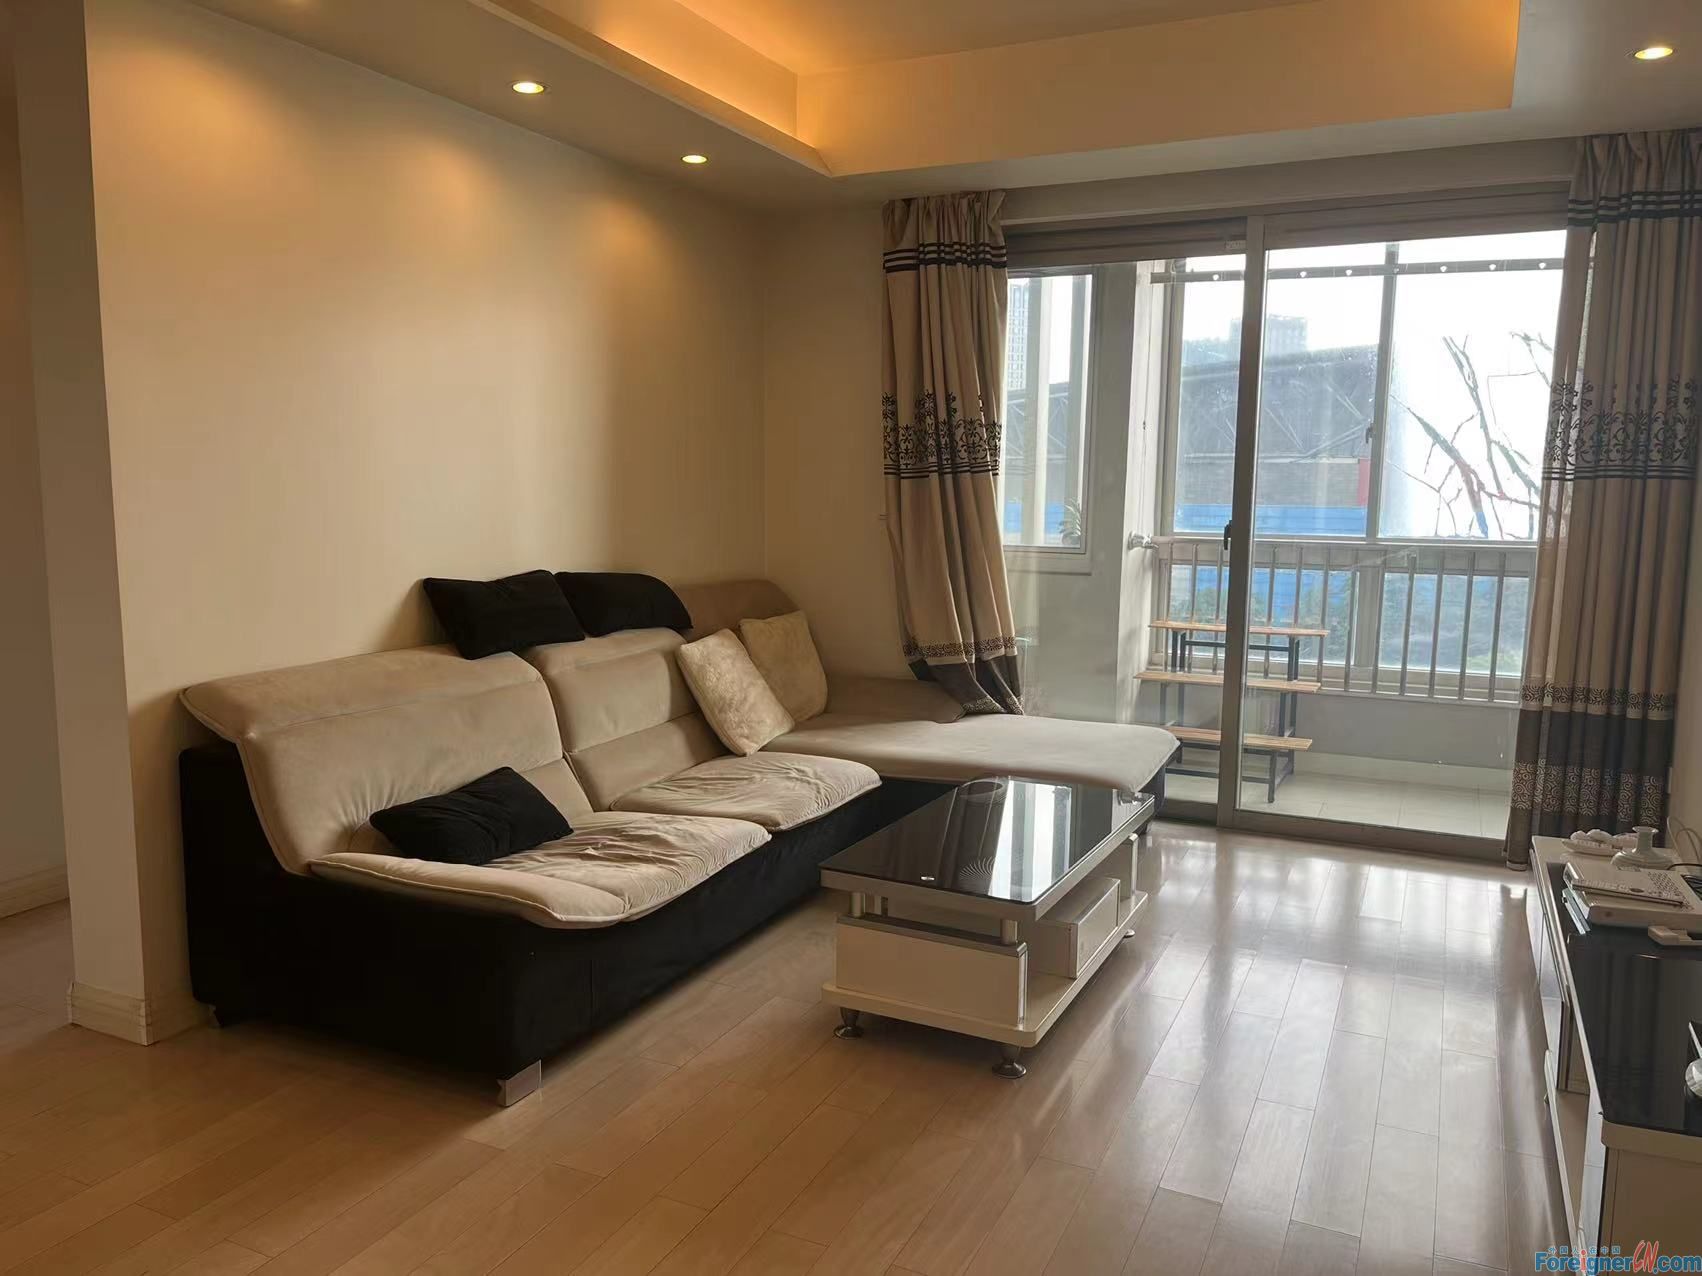 Great!! good location Apartment rent in SIP/  2 bedrooms and 1 bathroom/with Floor heating/Times Square/close to Suzhou Culture and Expo Shopping Center/Subway station